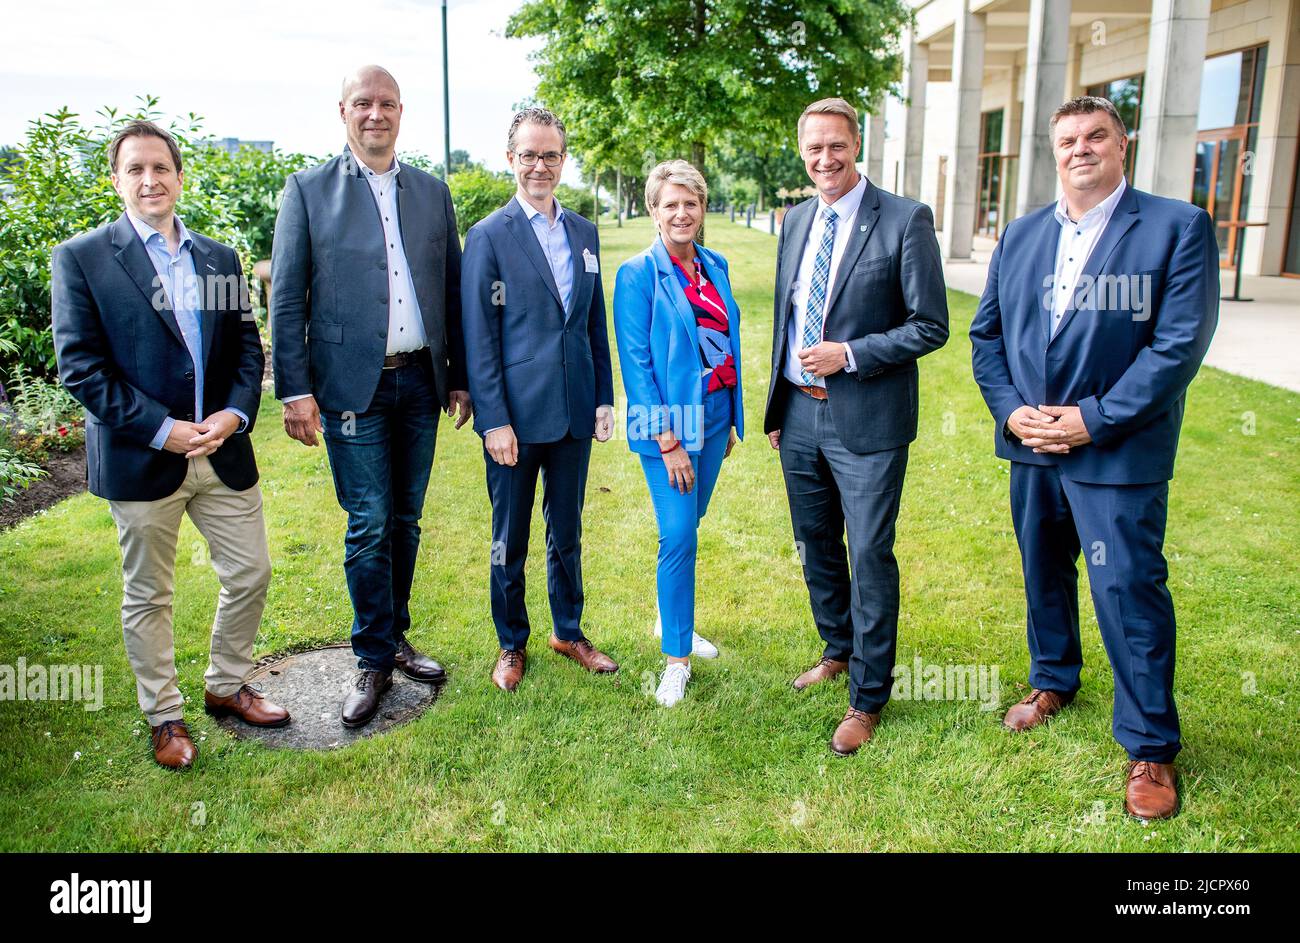 15 June 2022, Lower Saxony, Wilhelmshaven: Armin Kanning (l-r), Managing Director of Wangerland Touristik, Göran Sell, acting Managing Director of Tourismusagentur Nordsee GmbH, Berend Lindner, State Secretary in Lower Saxony's Ministry of Economics, Sonja Janßen, Managing Director of Die Nordsee GmbH, Holger Heymann, District Administrator in the Wittmund district and Chairman of Tourismusverband Nordsee e.V., and Carsten Feist (non-party), Mayor of the City of Wilhelmshaven, stand in front of the Atlantic Hotel before the start of the North Sea Tourism Day 2022. The focus of this year's meet Stock Photo